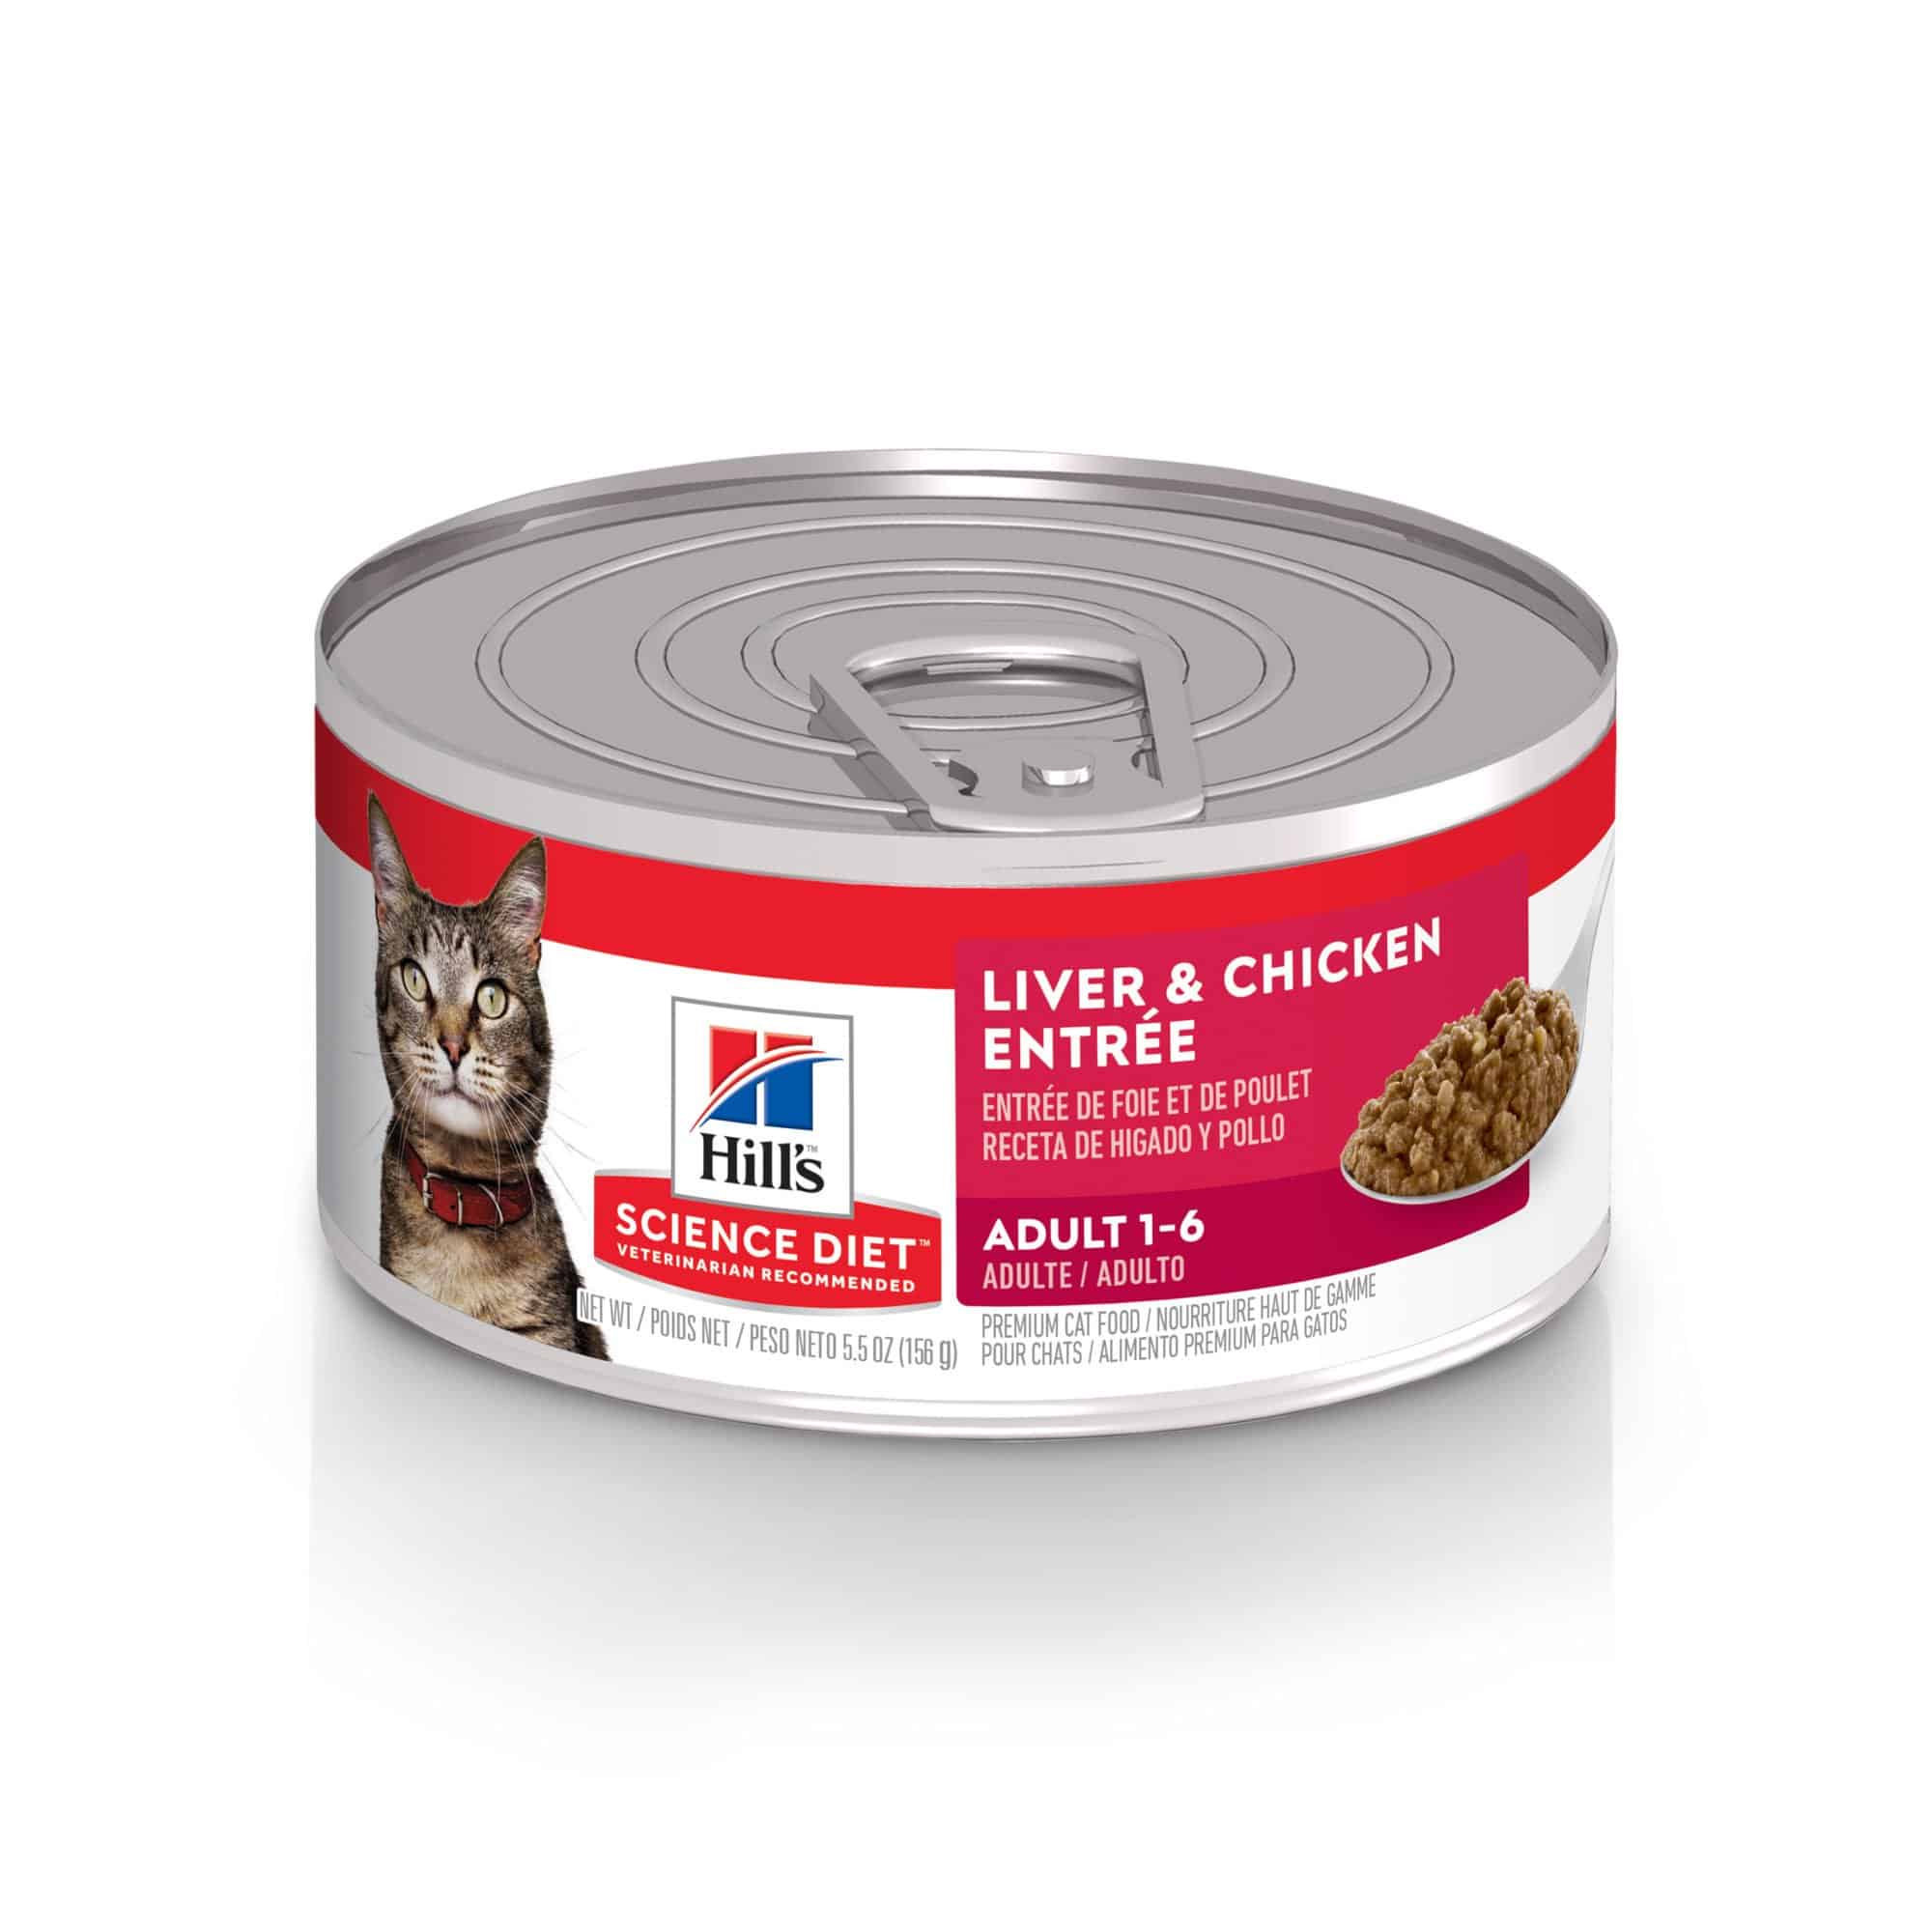 Hills Science Diet Adult Liver &  Chicken Entree Canned Cat Food